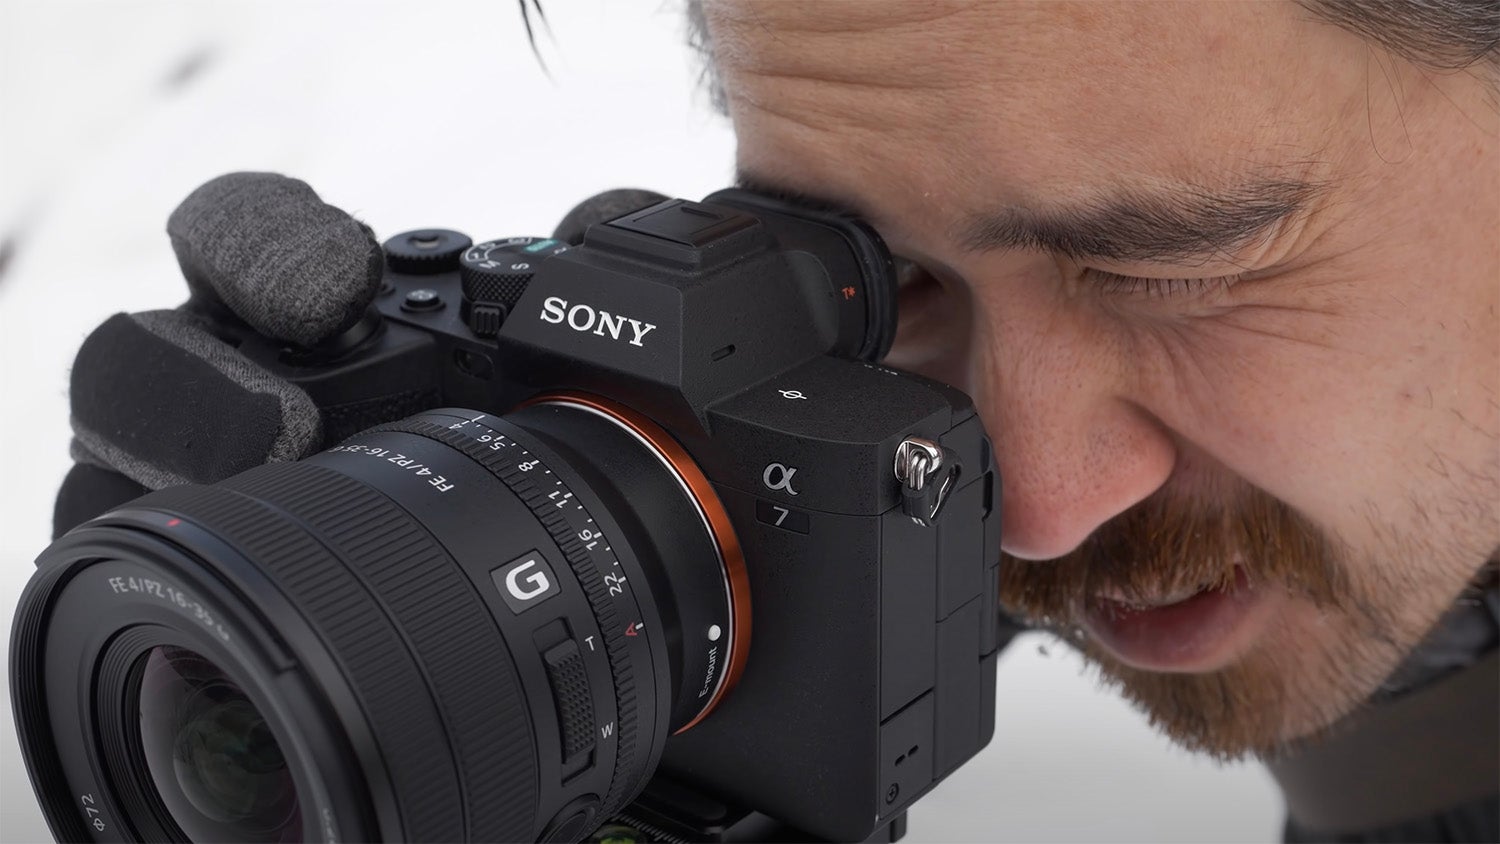 Review Roundup: The New Sony 16-35mm f/4 G PZ Lens